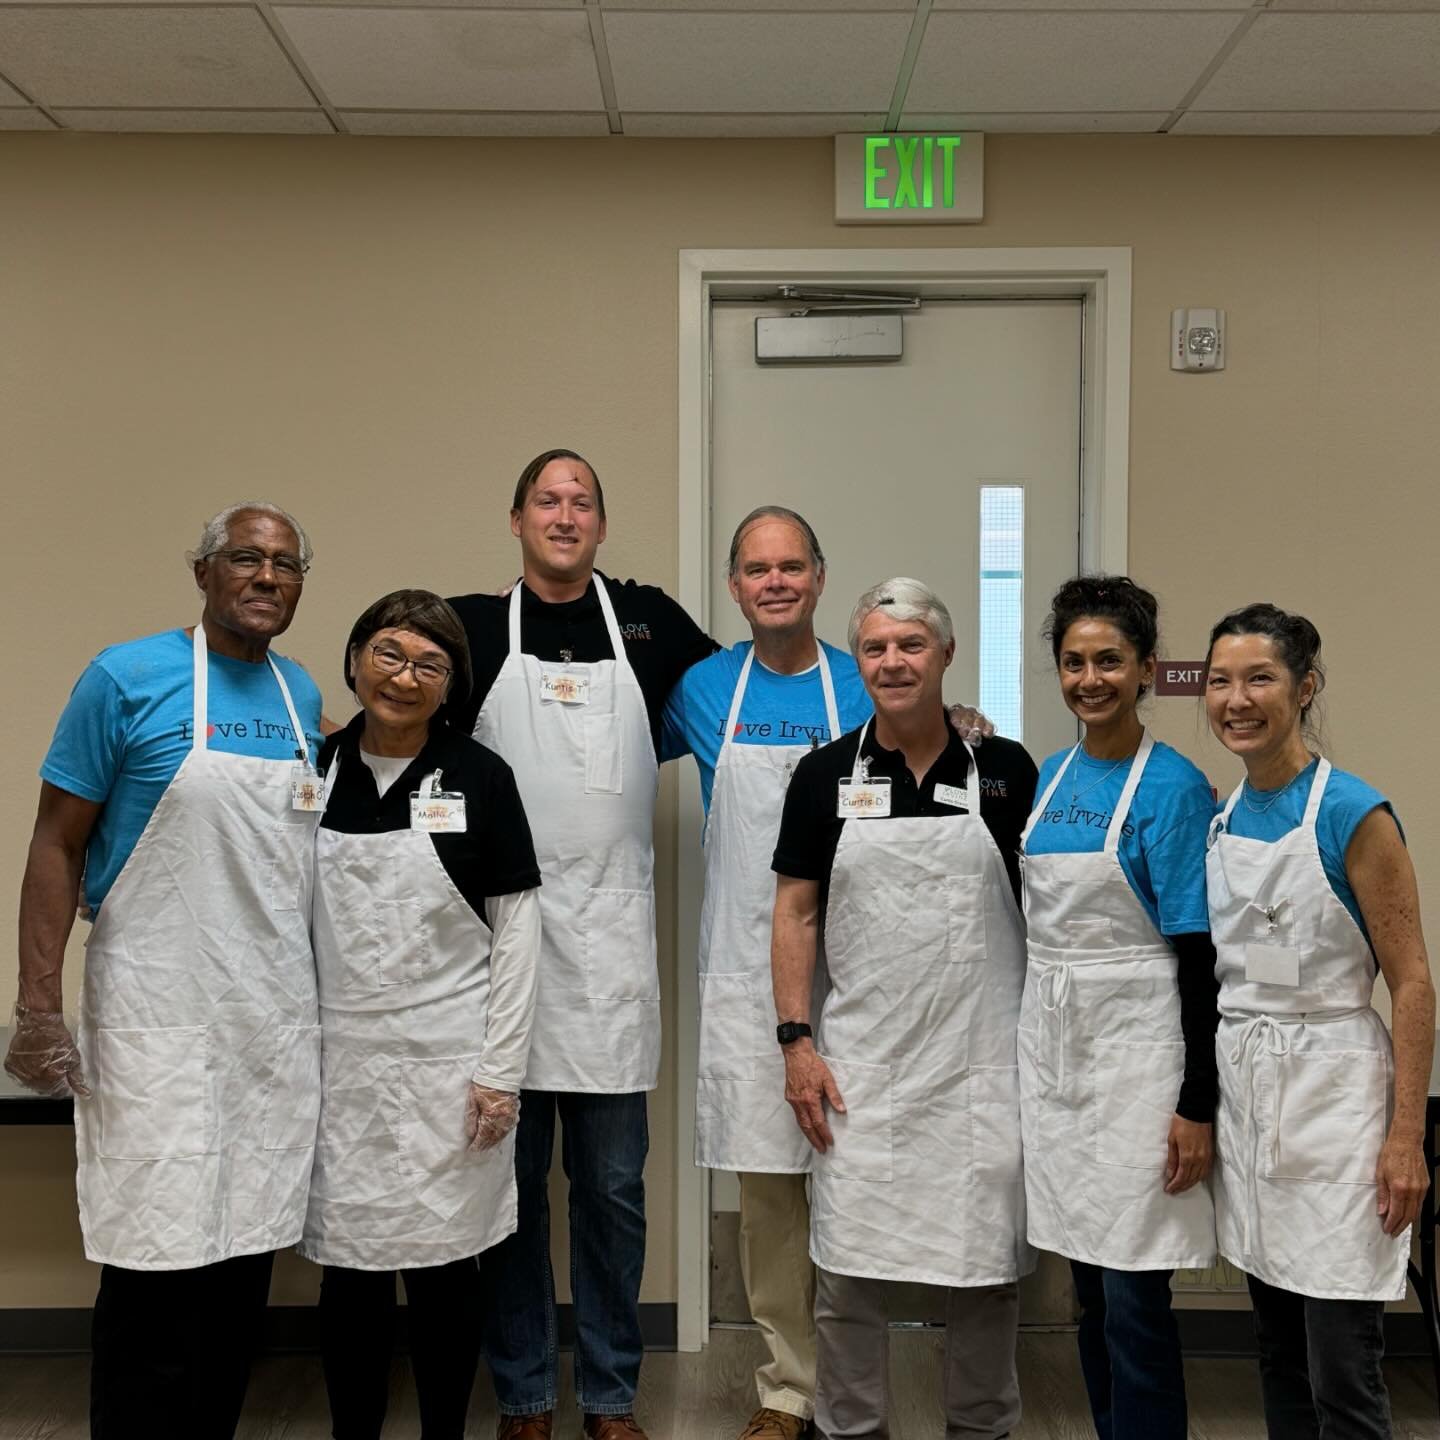 On Friday, Love Irvine had the pleasure of working alongside @tripointehomes volunteering at the Lakeview Senior Center&rsquo;s Volunteer Recognition Lunch! 🧡

#Irvine #CityofIrvine #Volunteer #IrvineCA #VisitIrvine #Volunteeropportunities